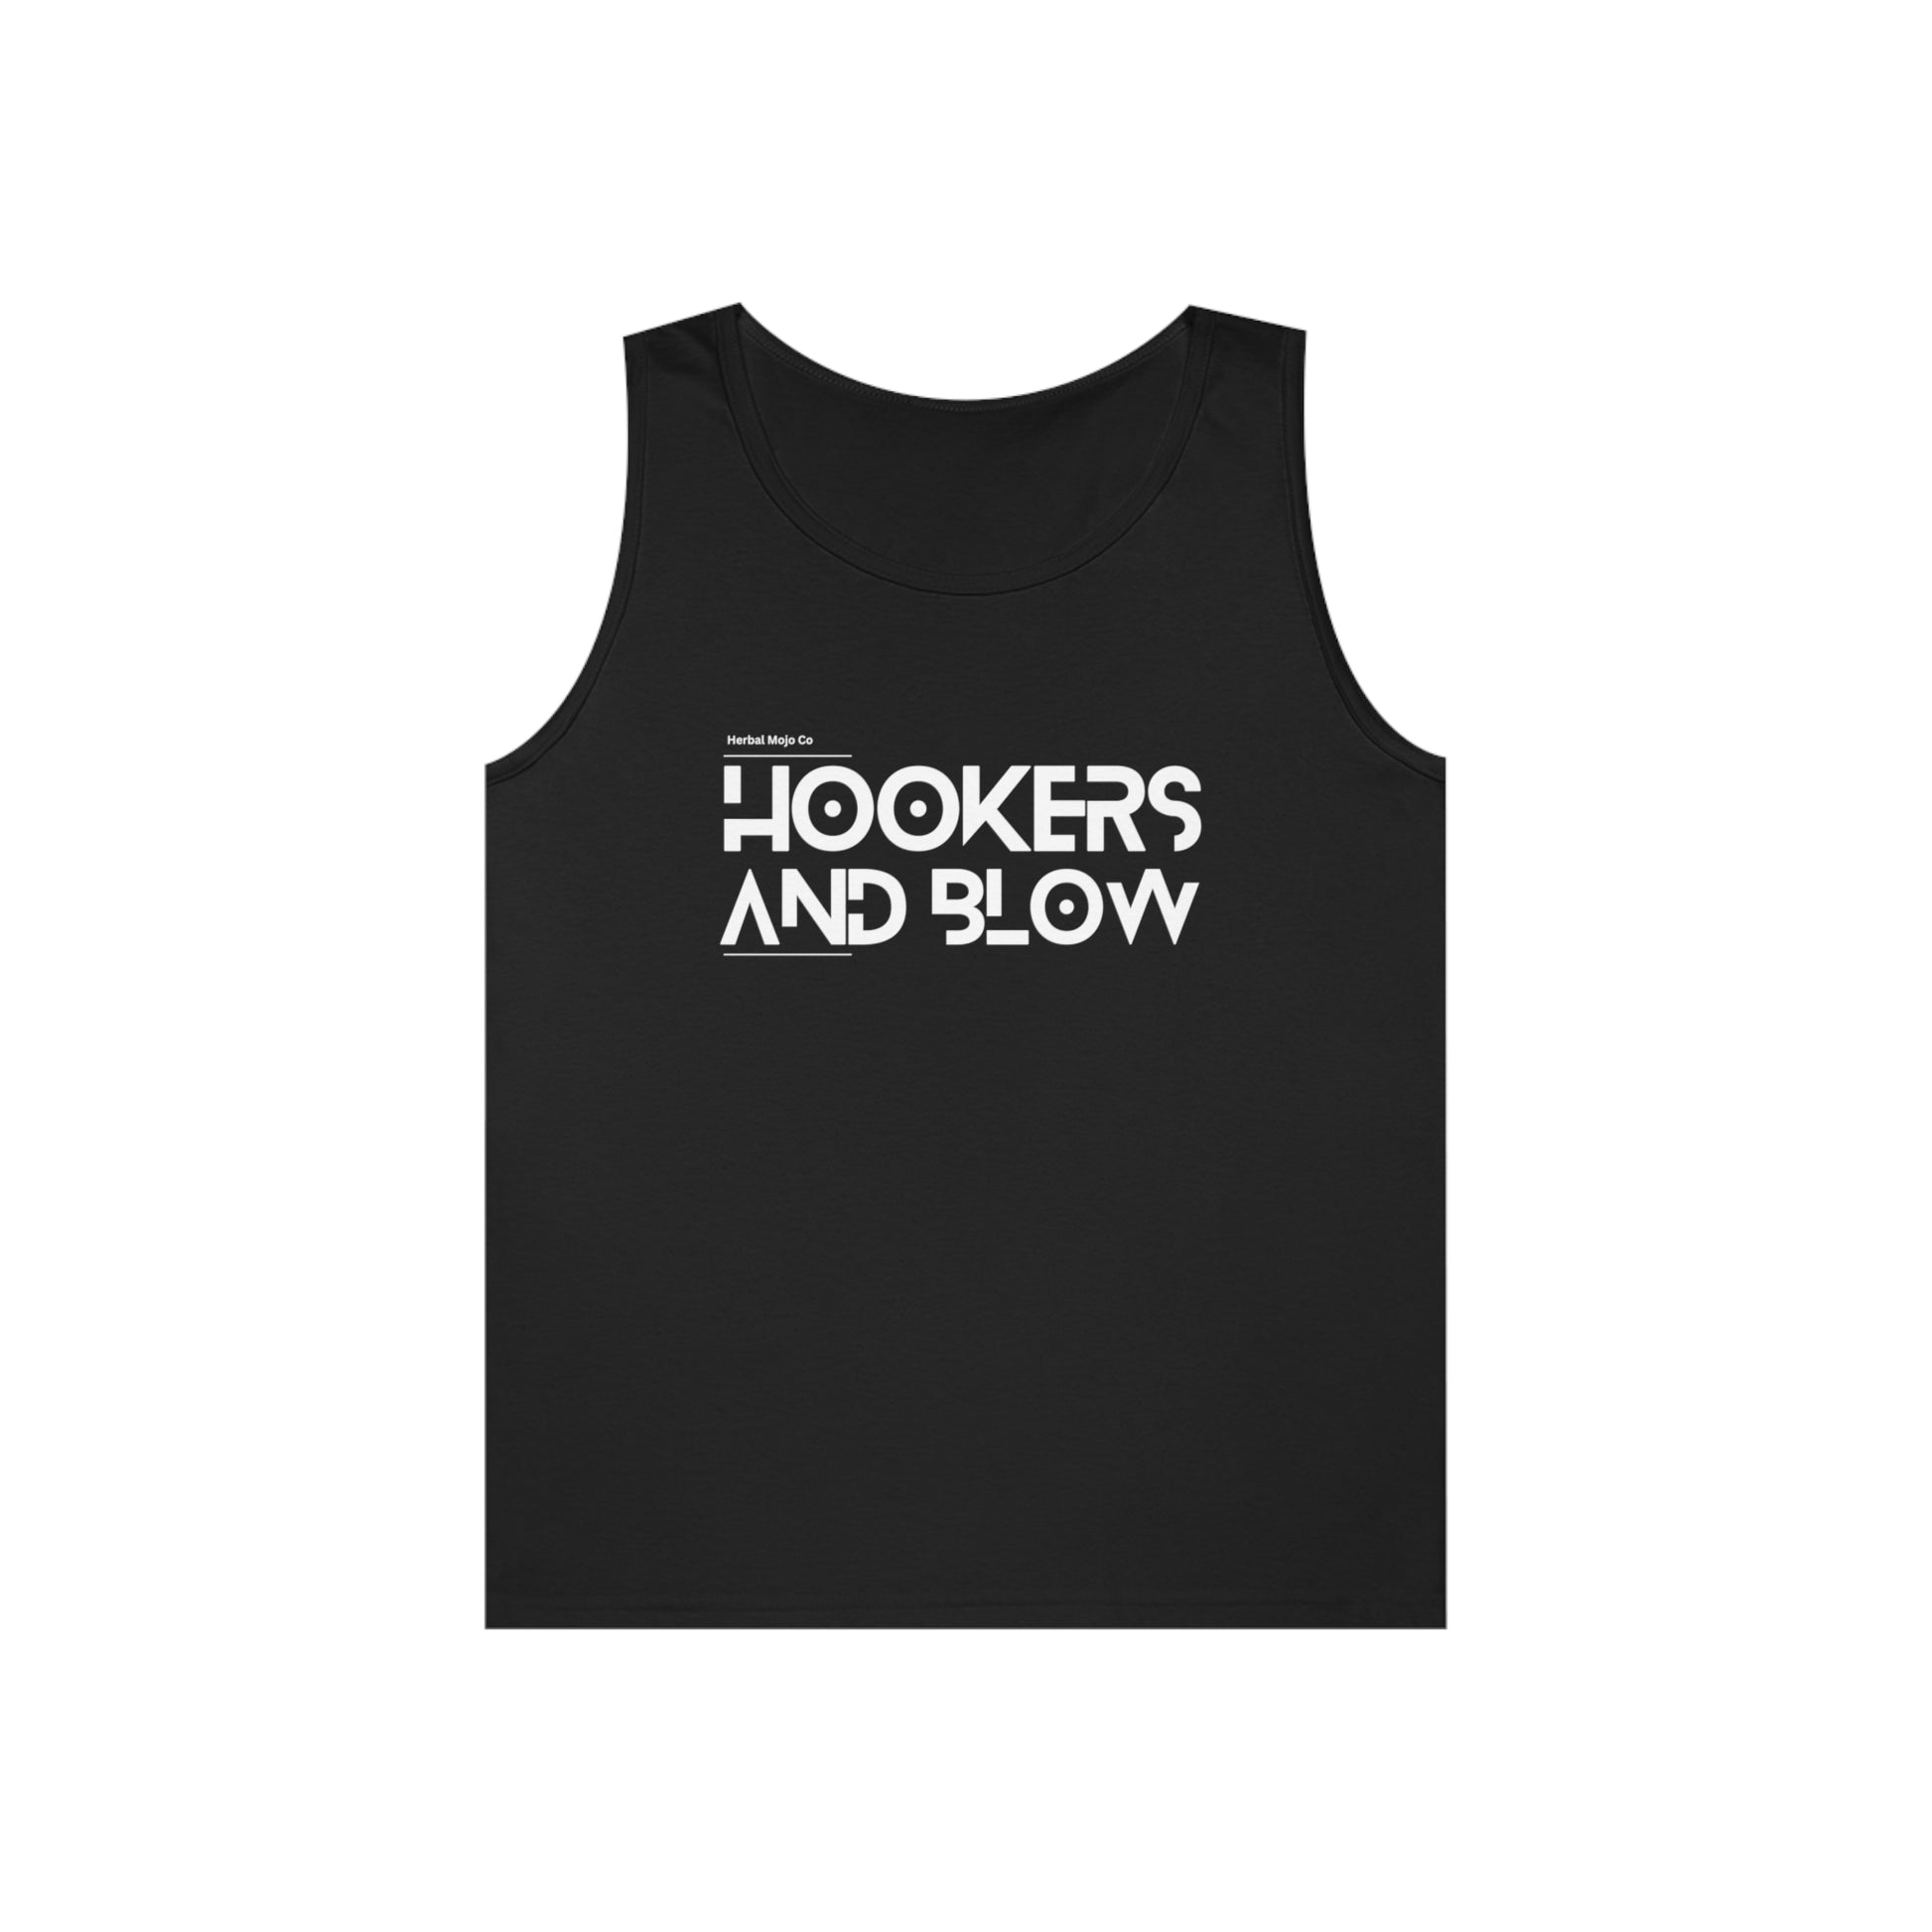 The Stamina for Men Hookers & Blow unisex Black cotton tank top product shot with white background